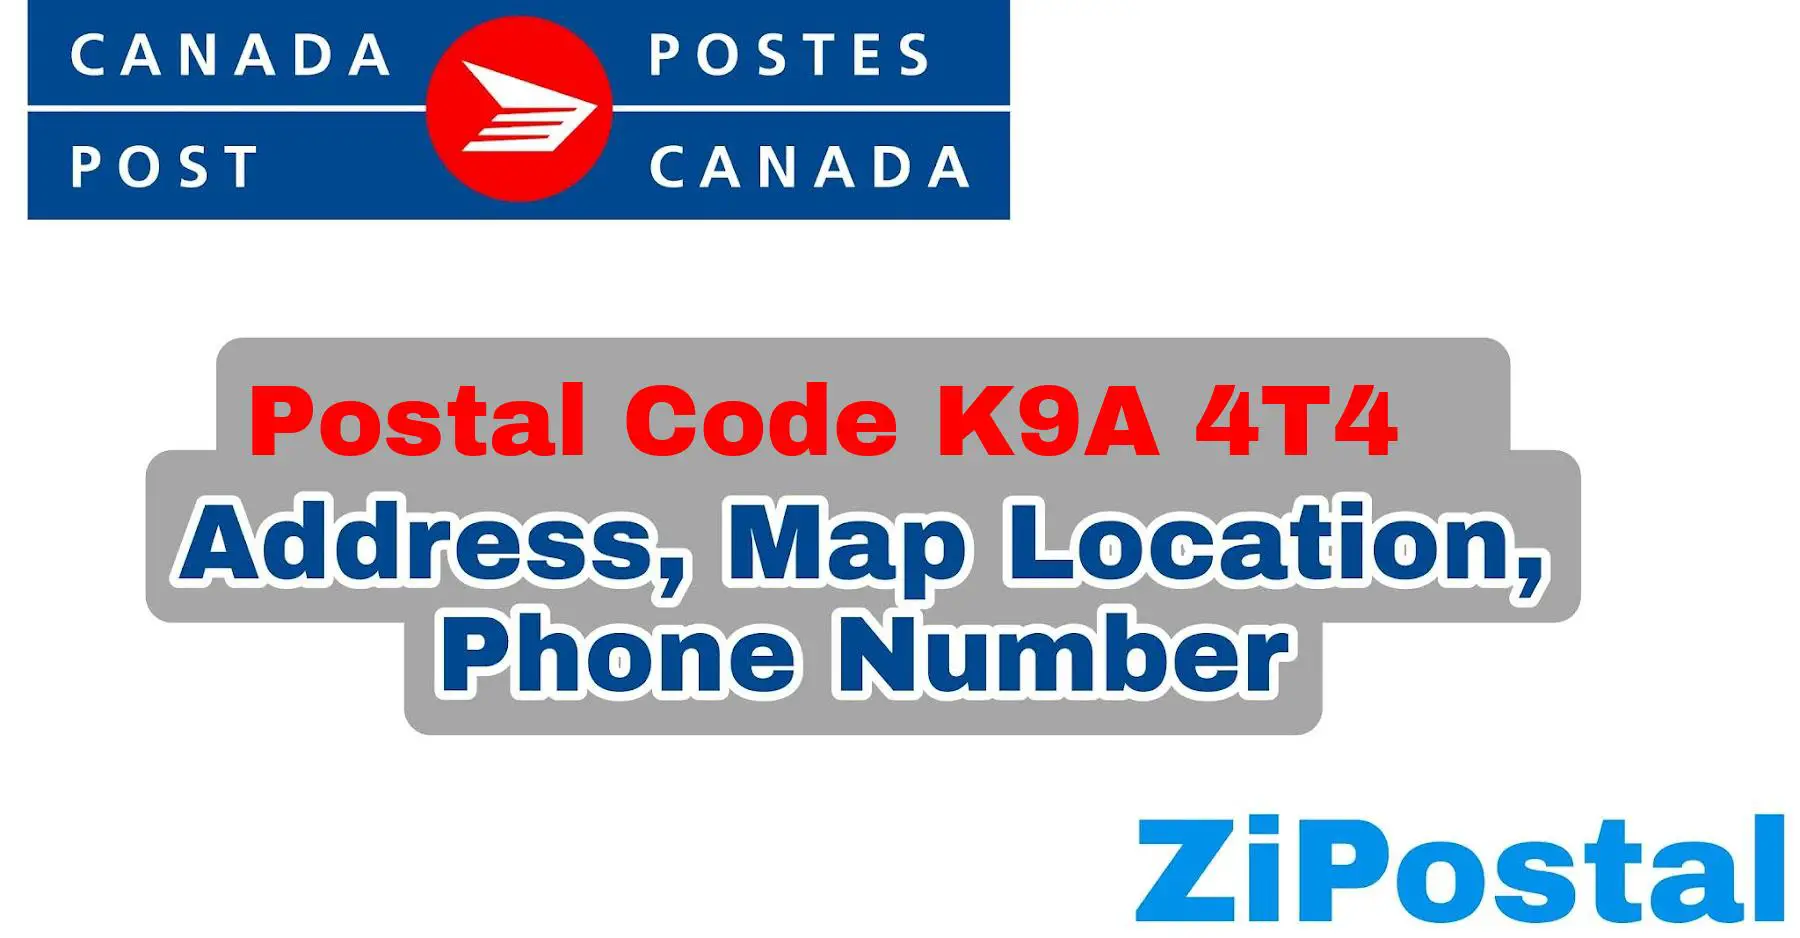 Postal Code K9A 4T4 Address Map Location and Phone Number